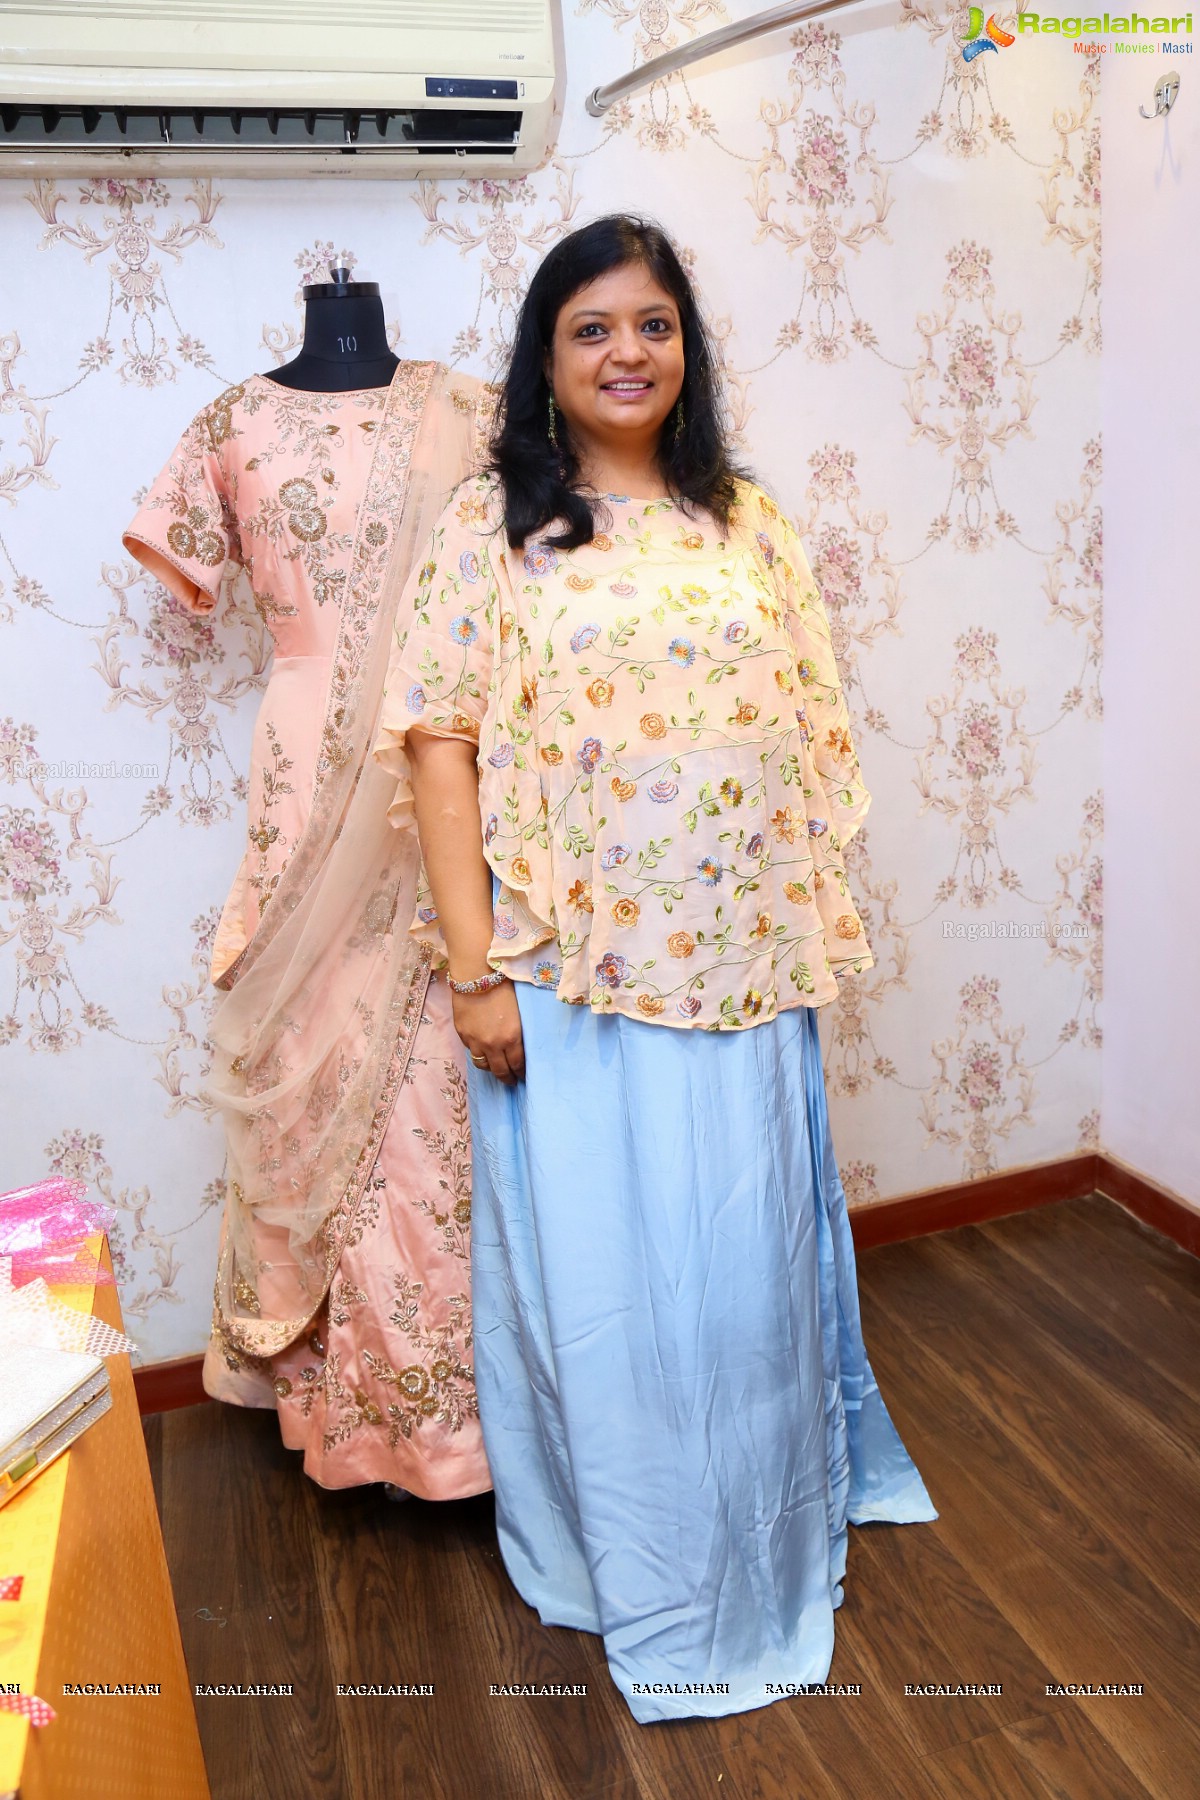 Label Deepali Tholia Opens Its 1st Store In Hyderabad at King Koti X Roads